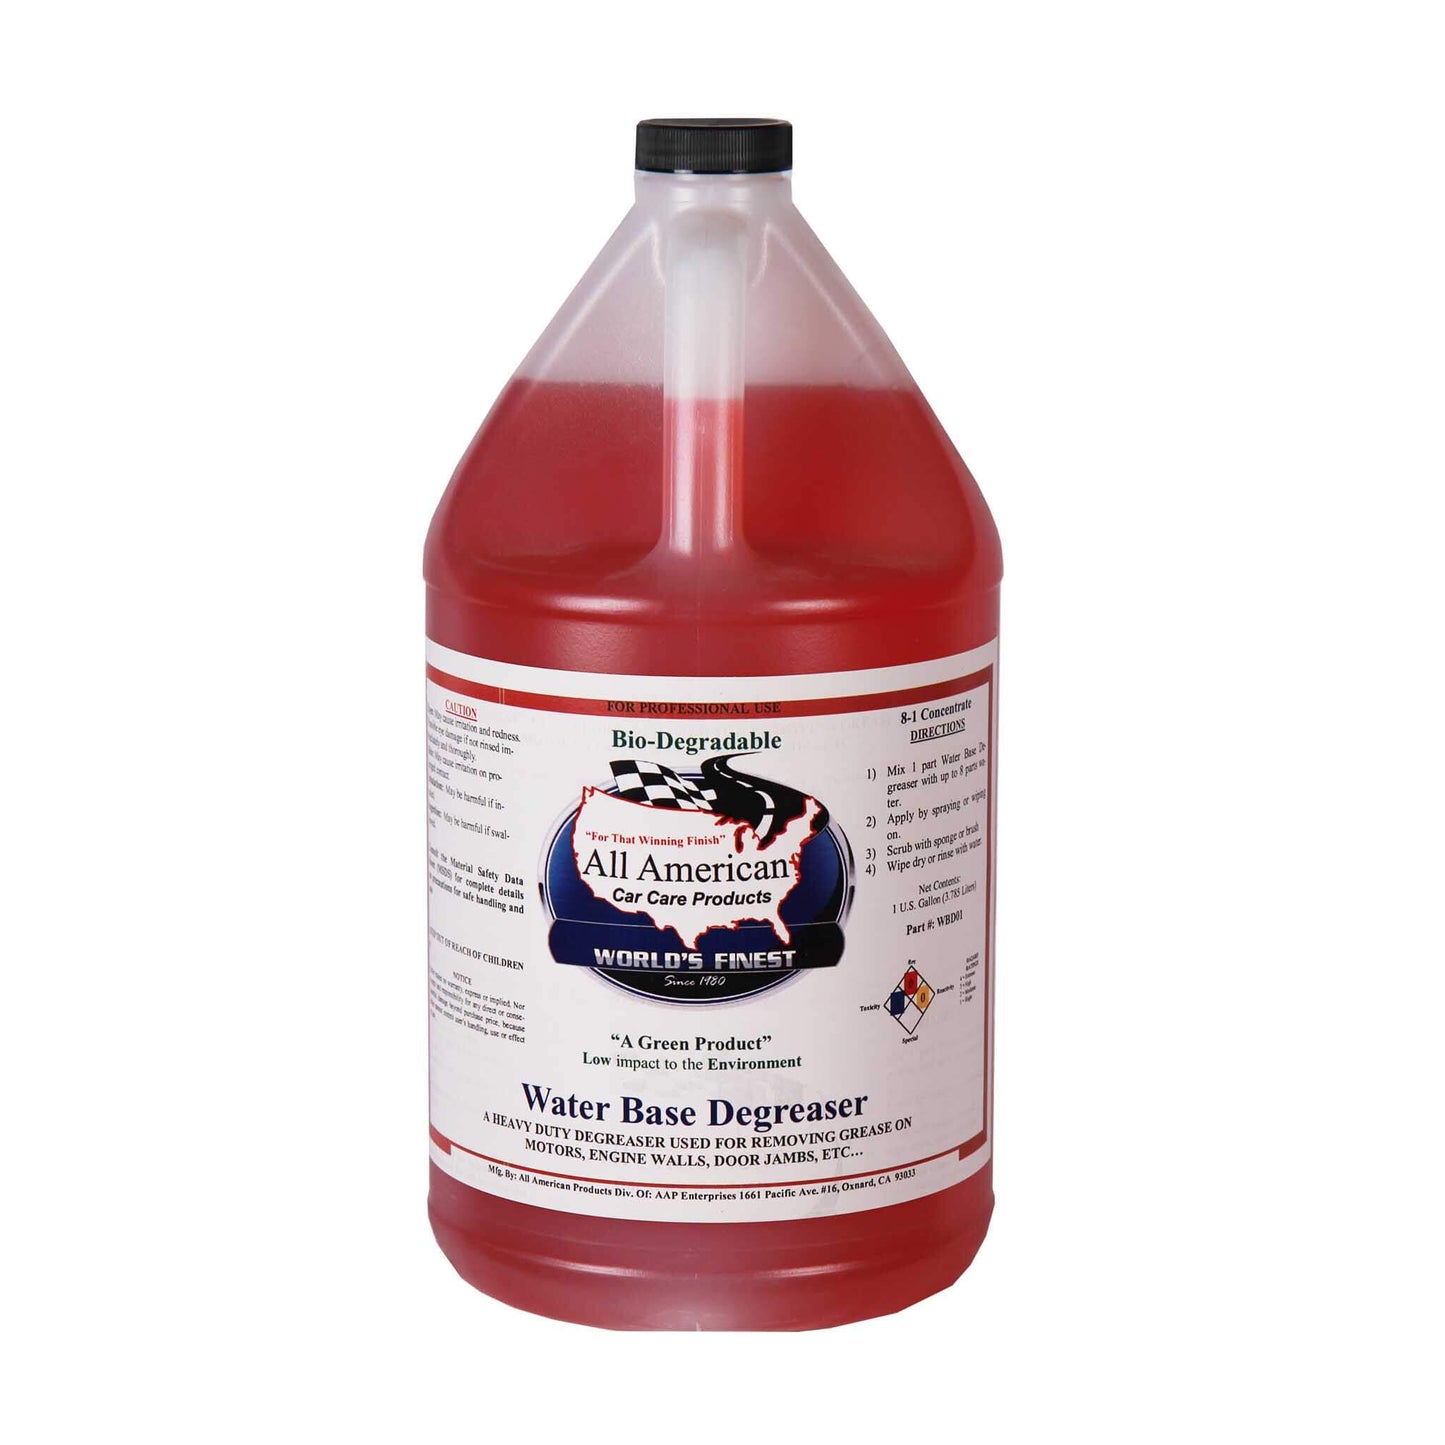 Water Based Degreaser (1 Gallon)